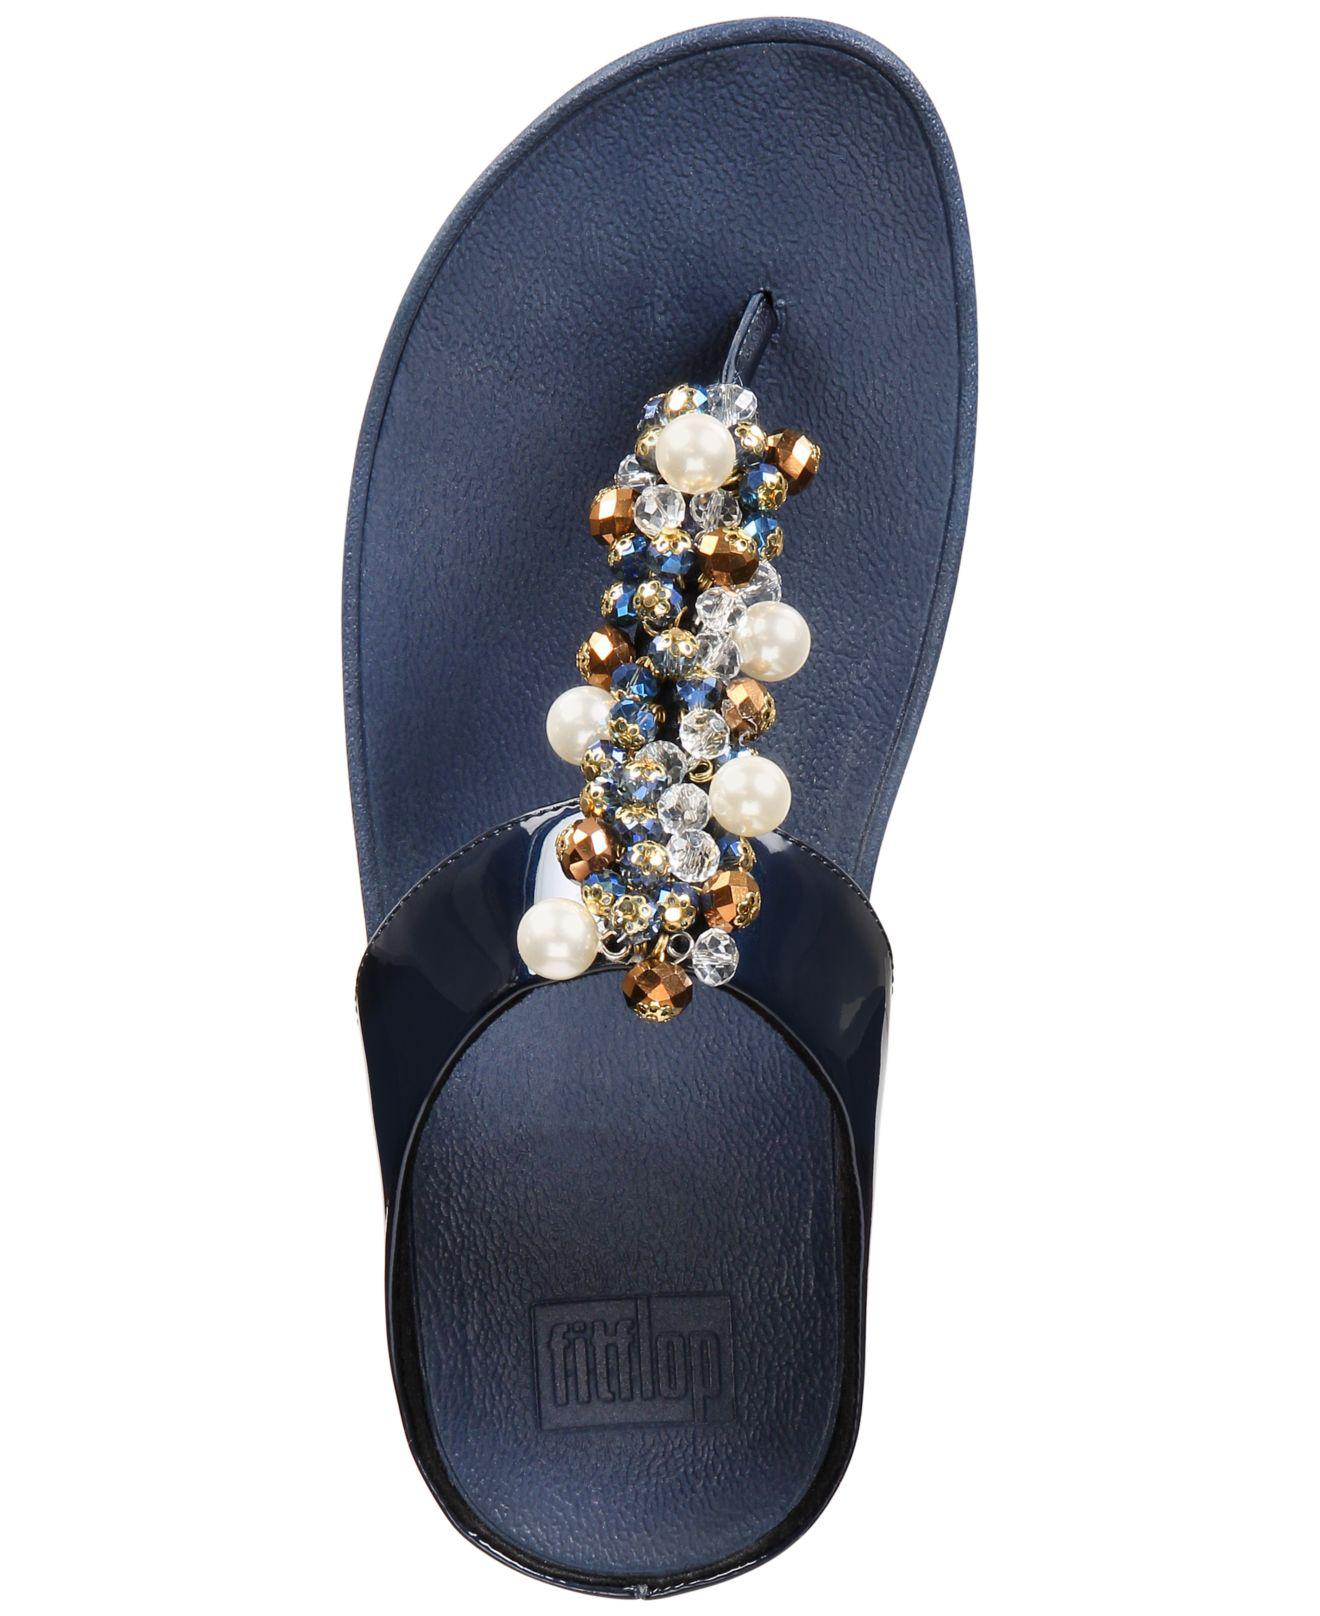 Fitflop Deco Flip-flop Sandals in 